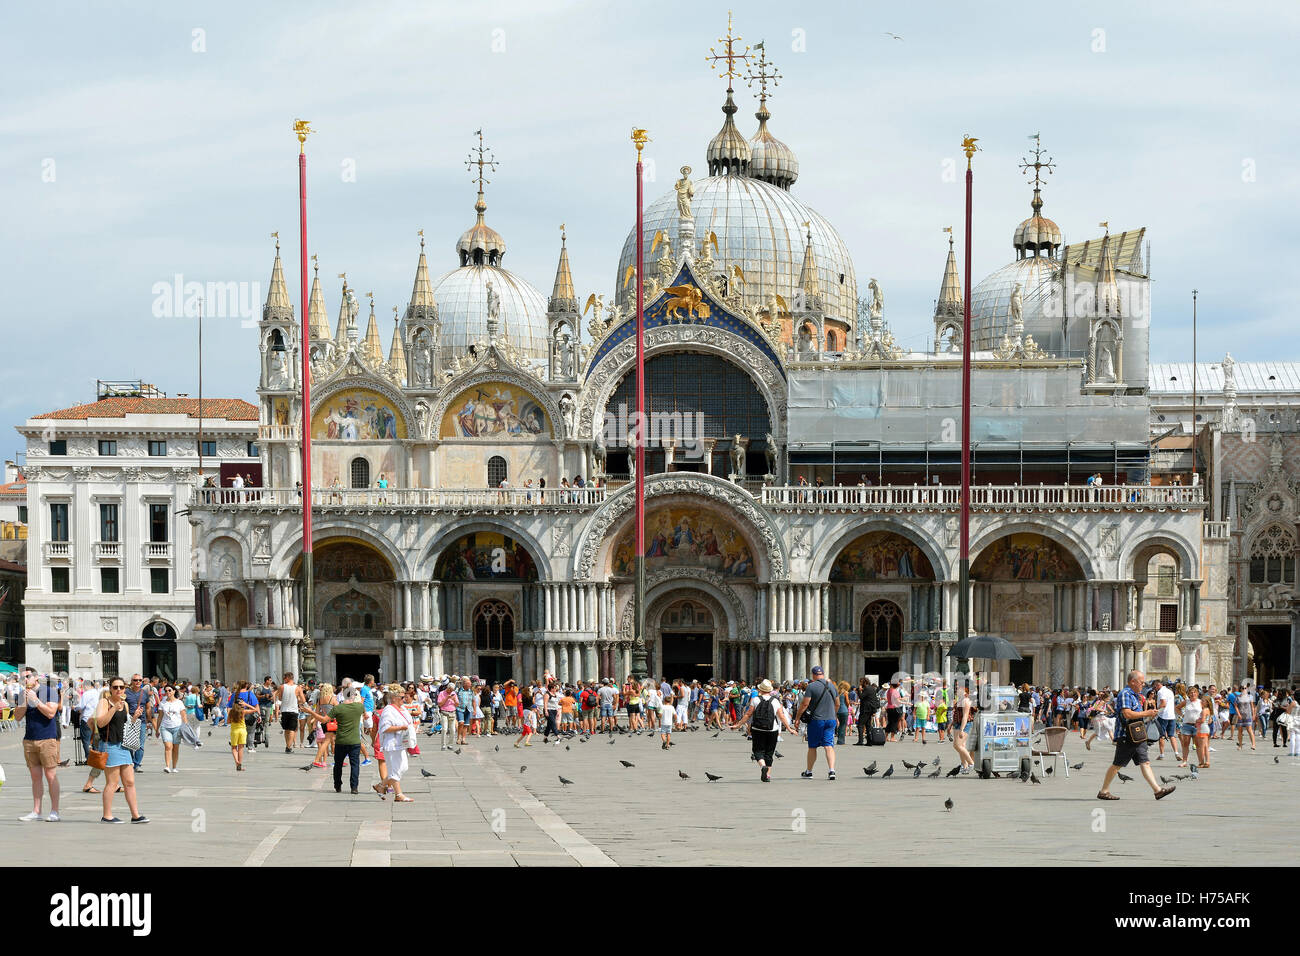 St. Mark’s square with tourists in front the St. Mark's Basilica of Venice in Italy. Stock Photo